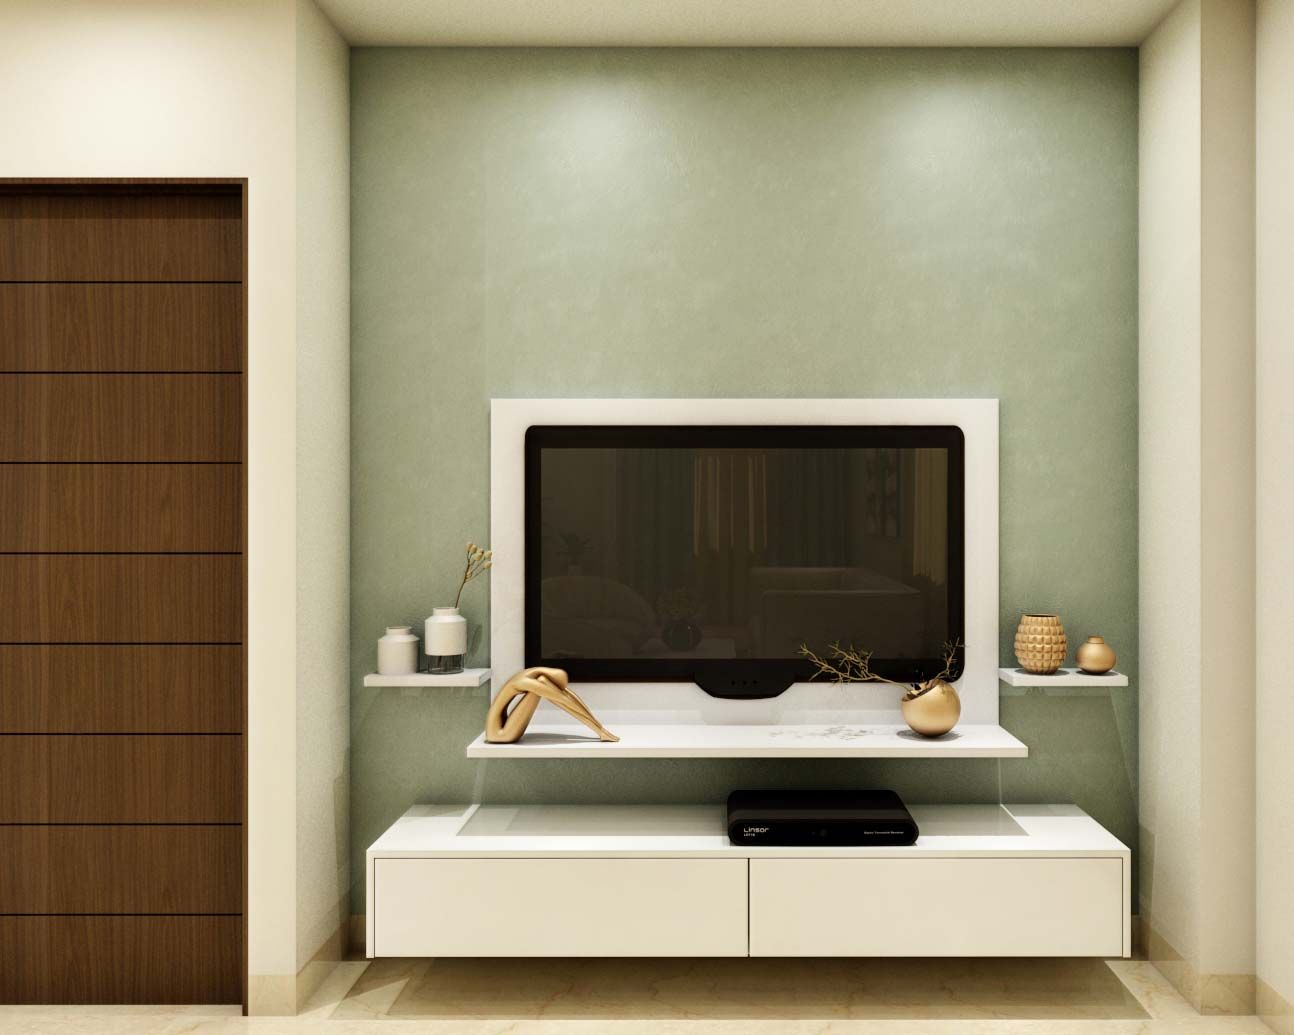 Modern TV Unit Design With Pastel Green And White Shades